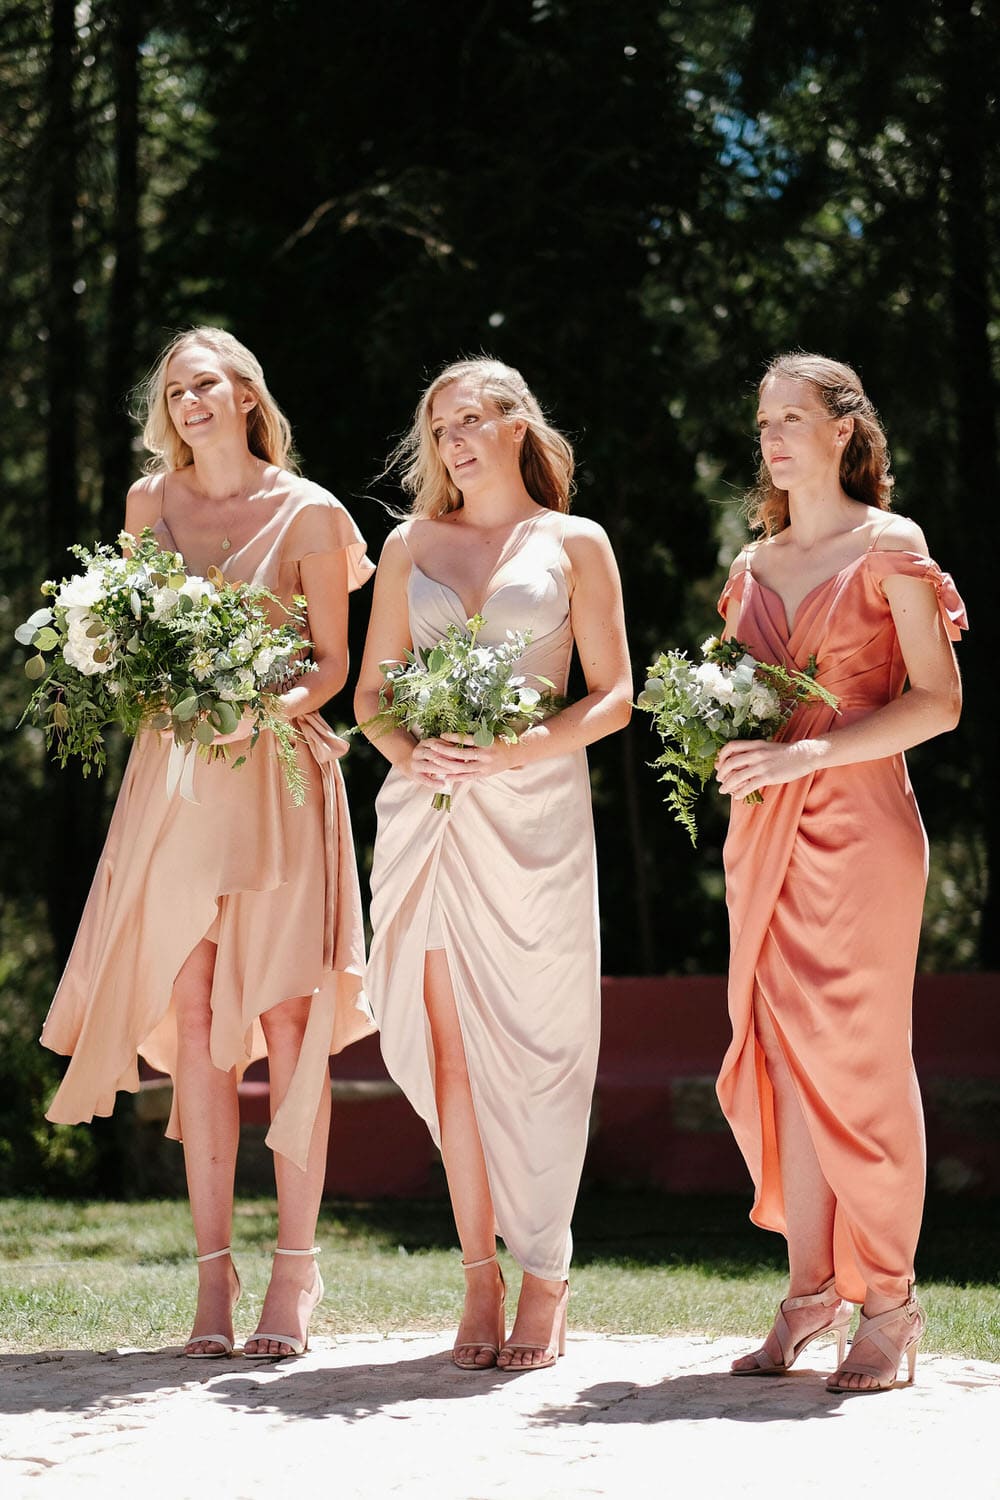 The smiling bridesmaids and maid of honor during the ceremony